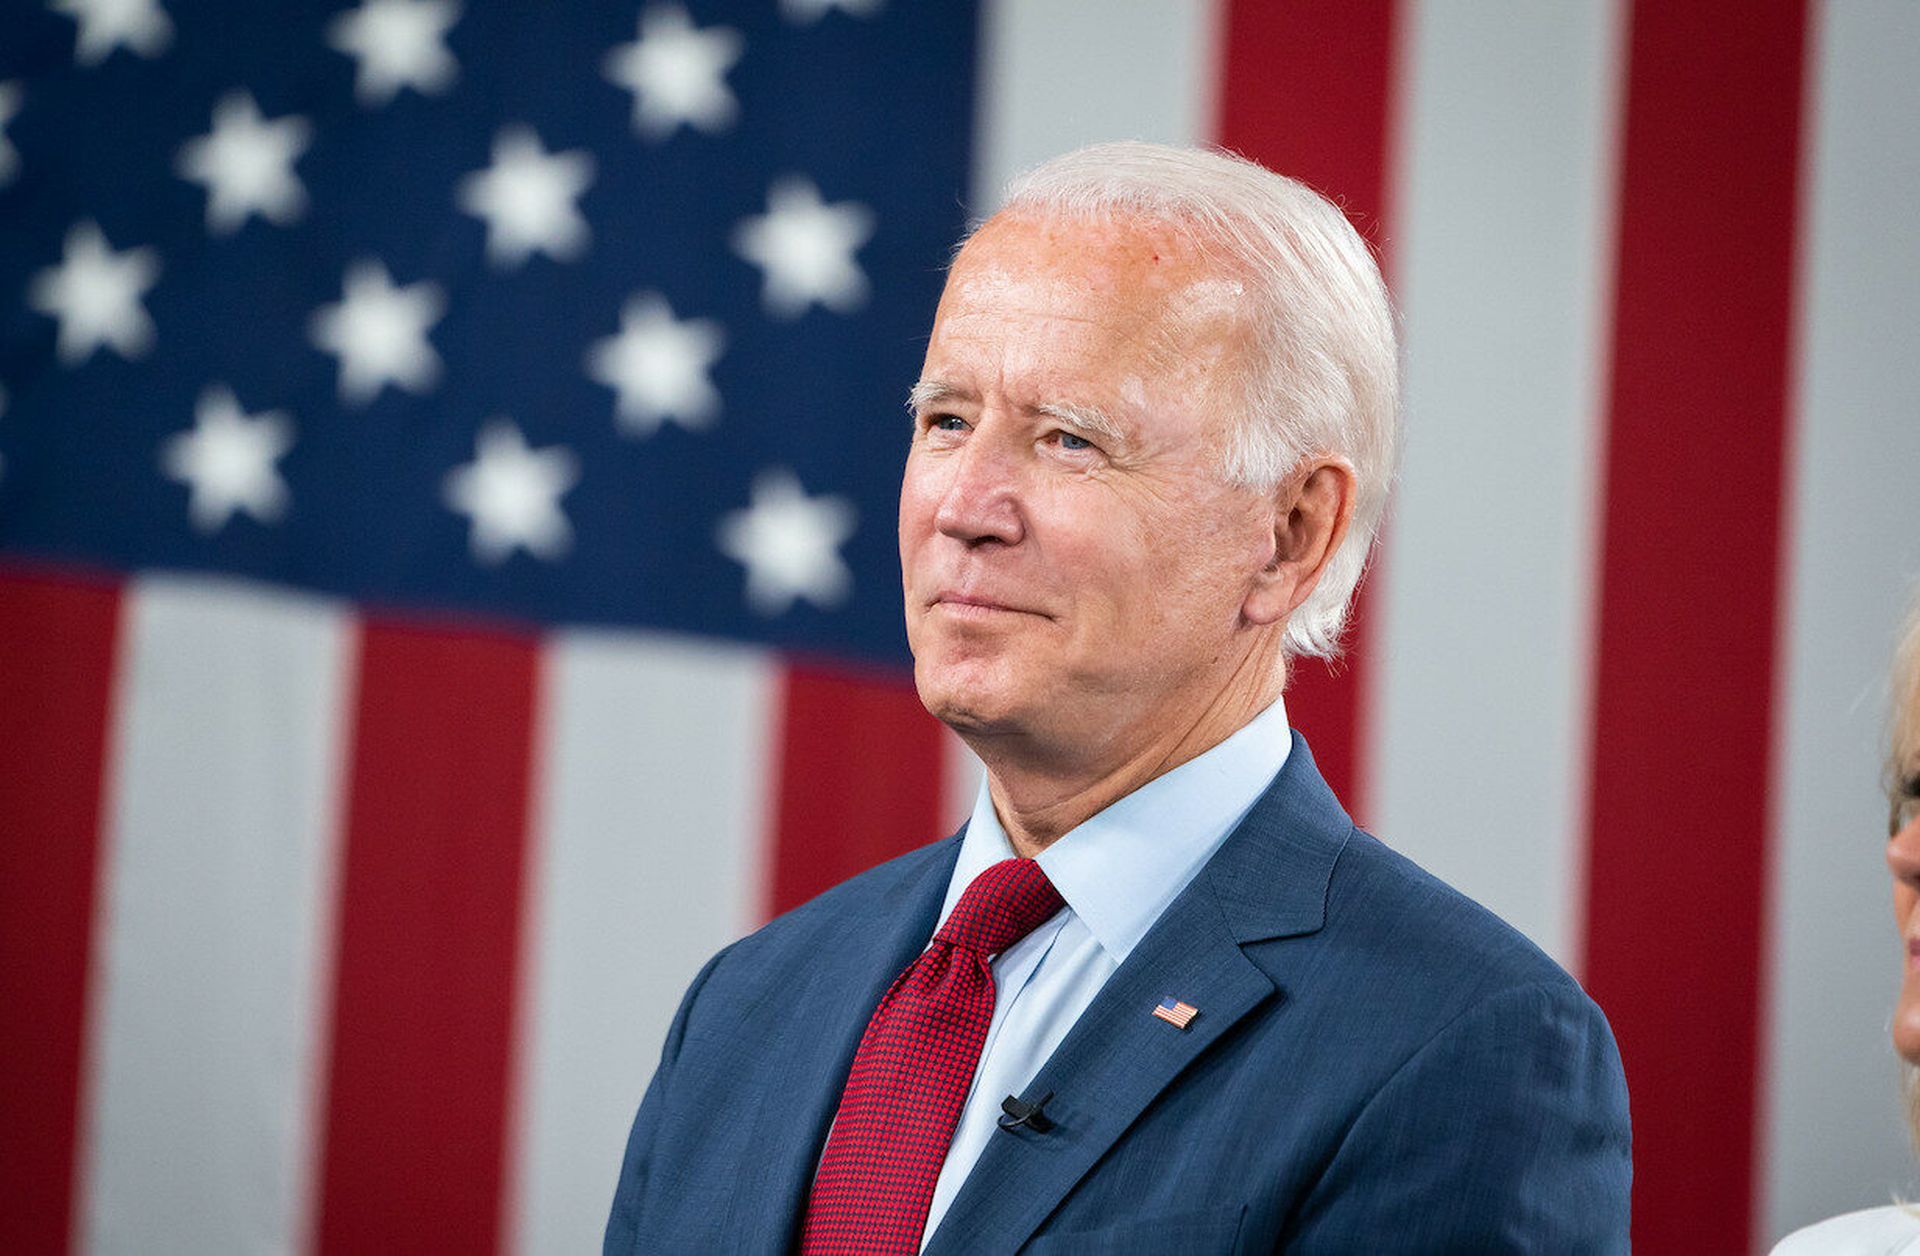 Today’s columnist, Danielle Jablanski of Nozomi Networks, writes that President Biden’s warning this week on impending Russian cyberattacks were not done in a vacuum. (Credit: Adam Schultz, Biden for President)